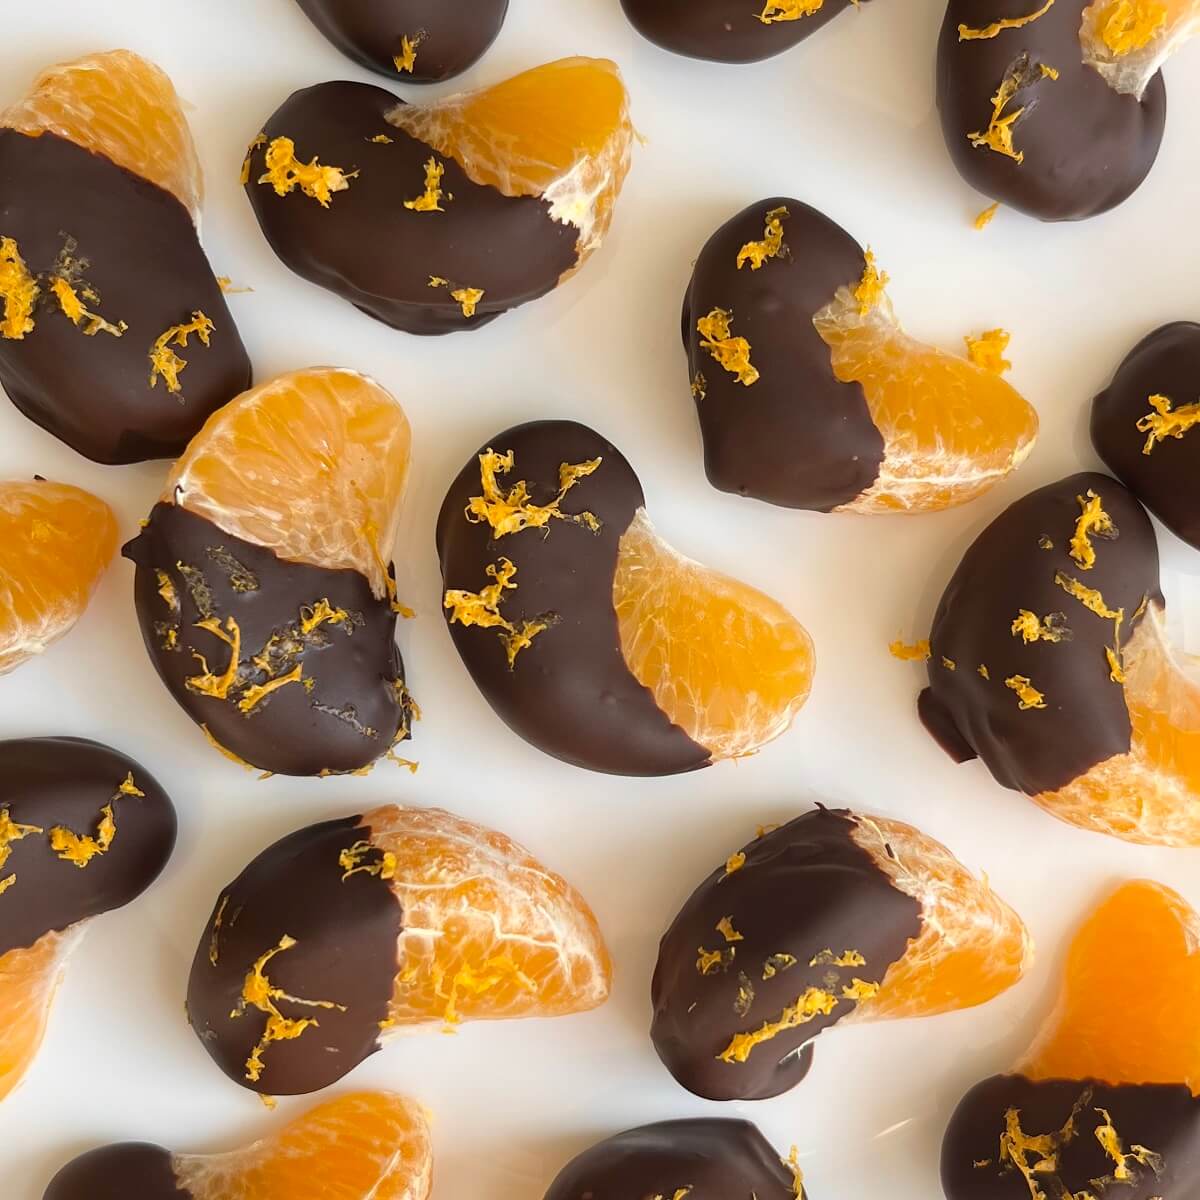 Chocolate covered orange segments sprinkled with orange zest on a white plate.